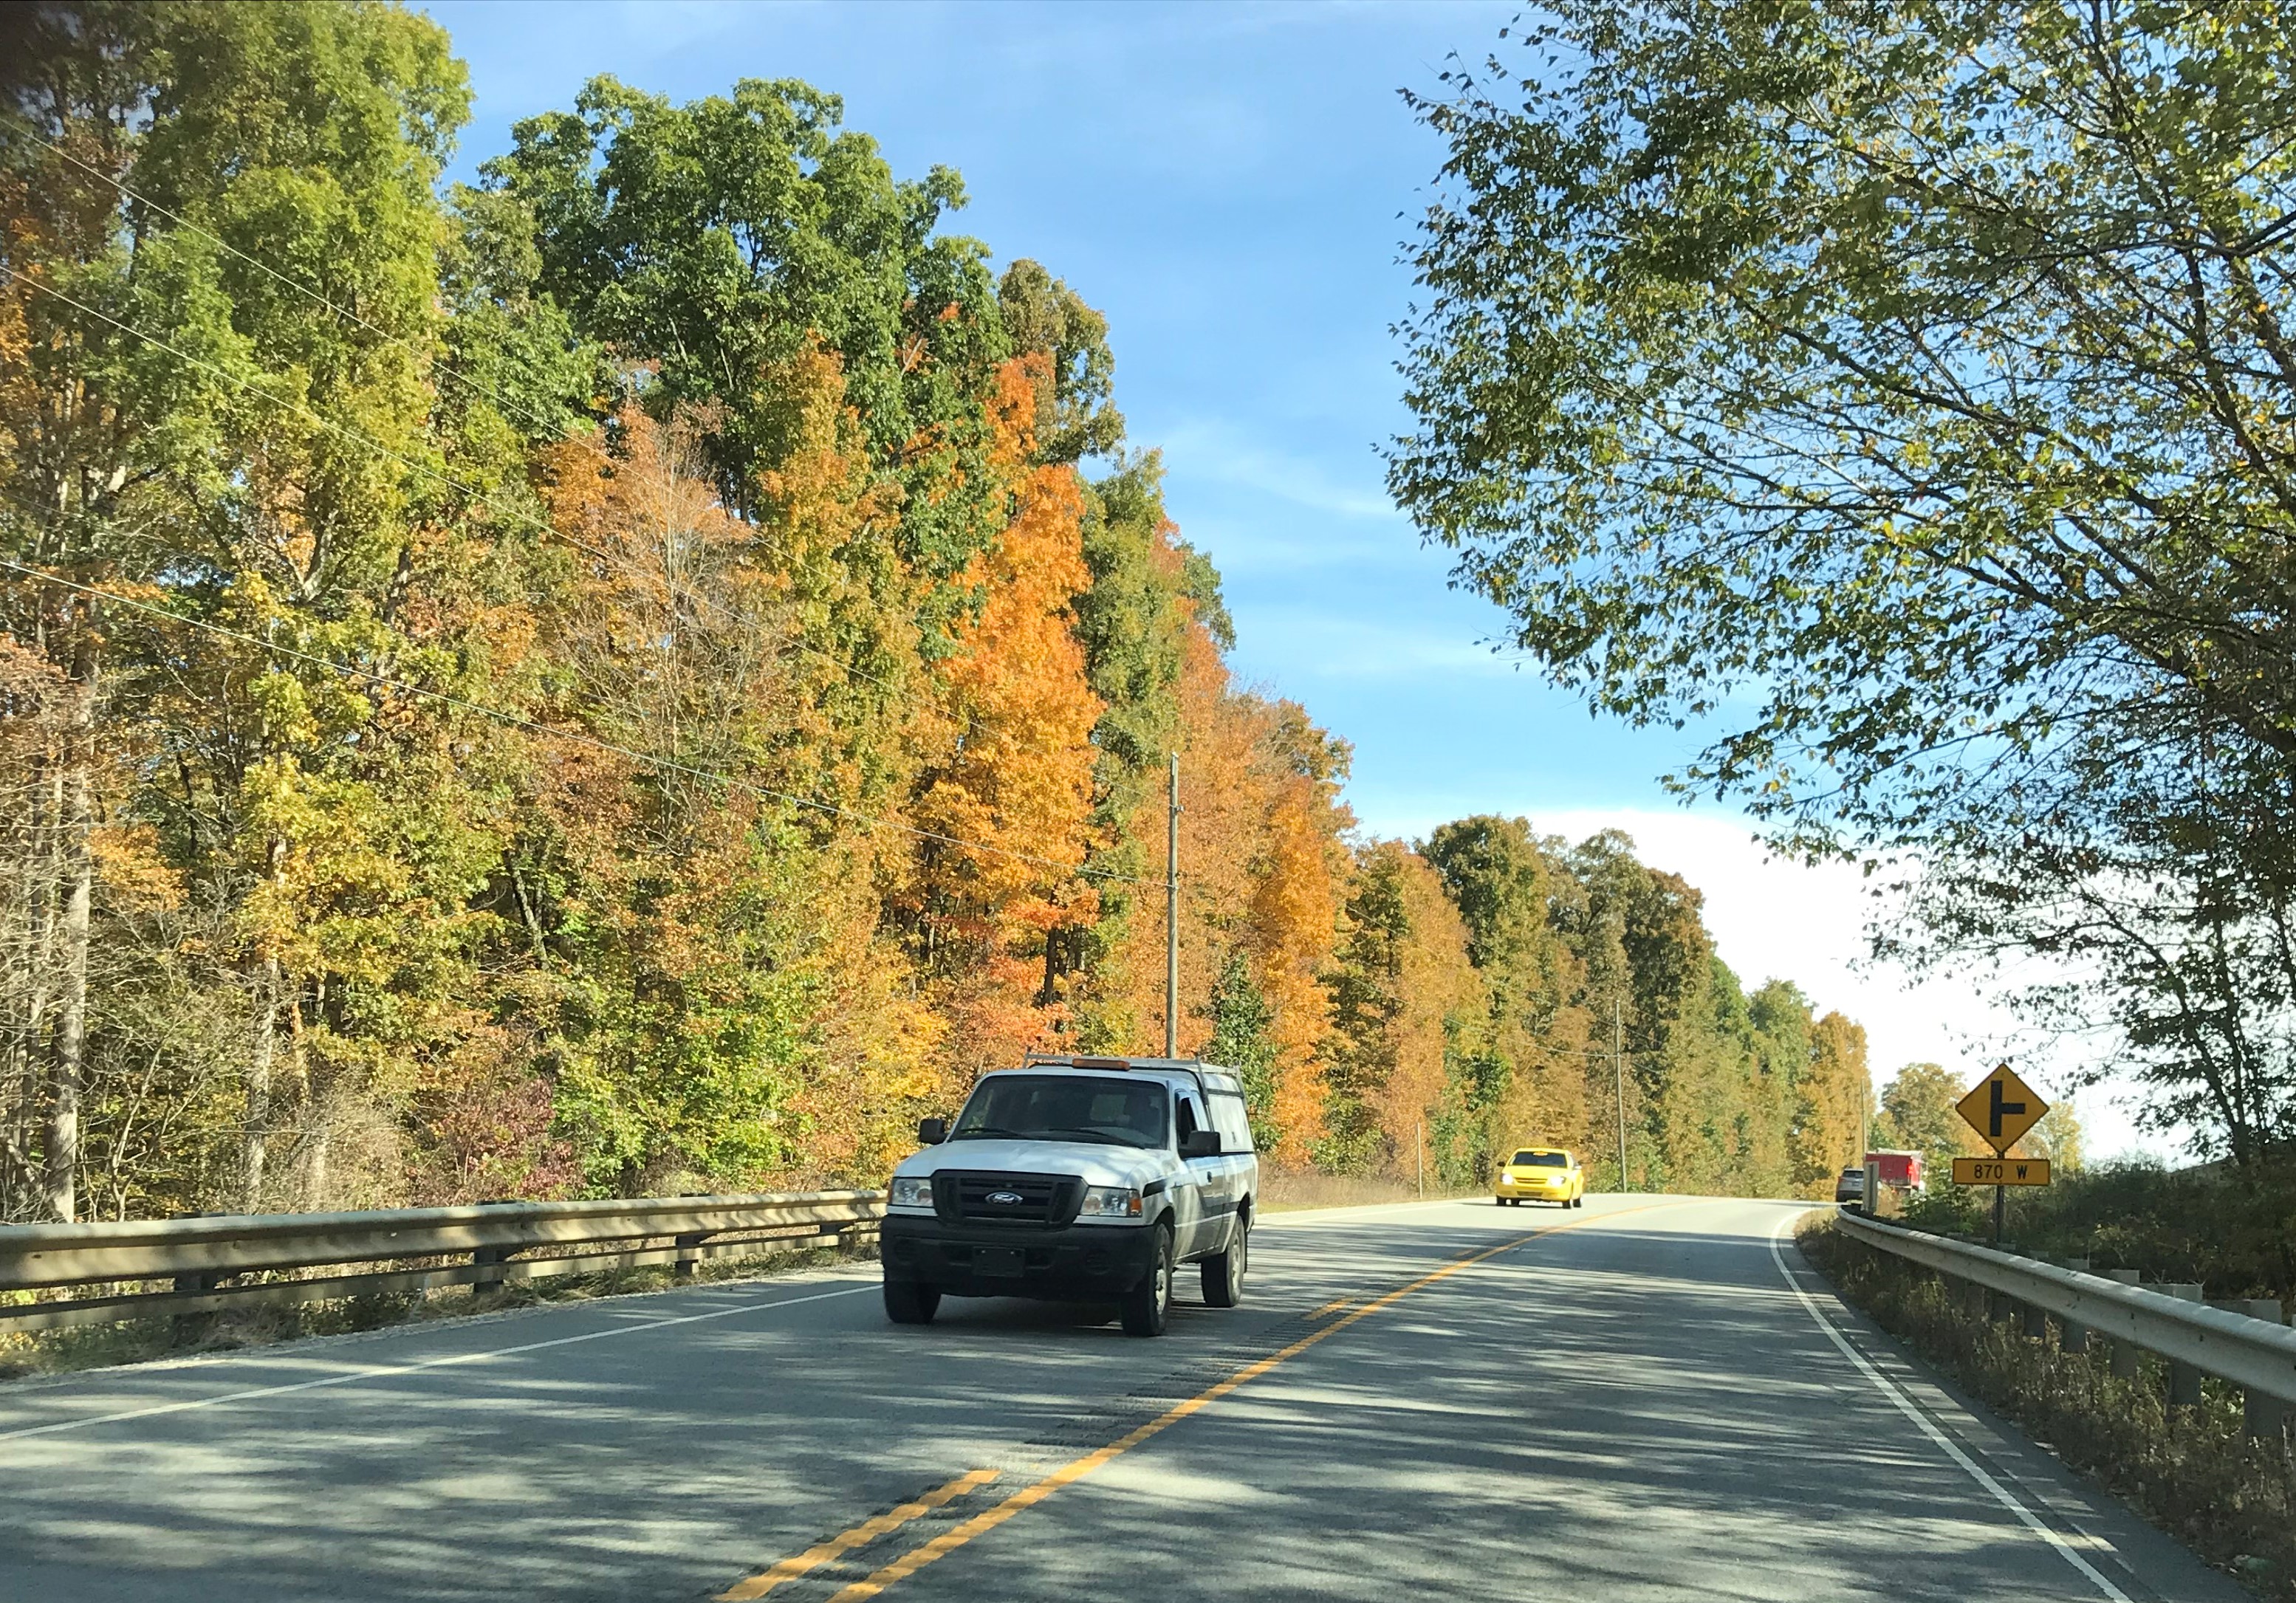 The Ohio leaves get even more orange as we head north.